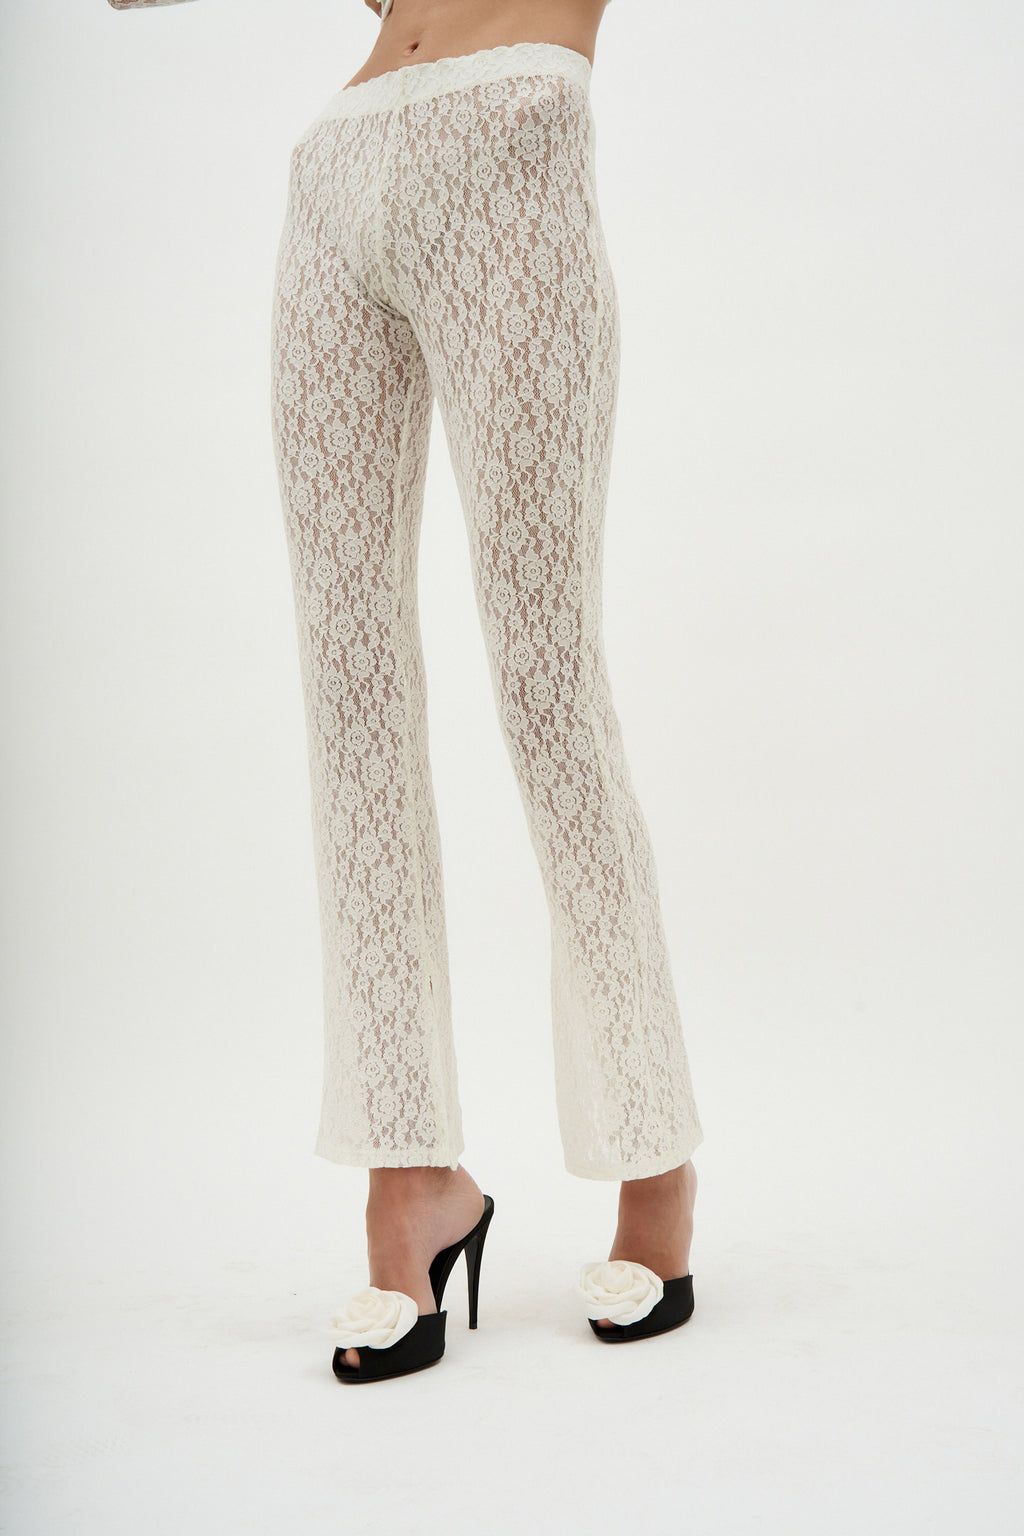 Low Rise Off White Lace Legging